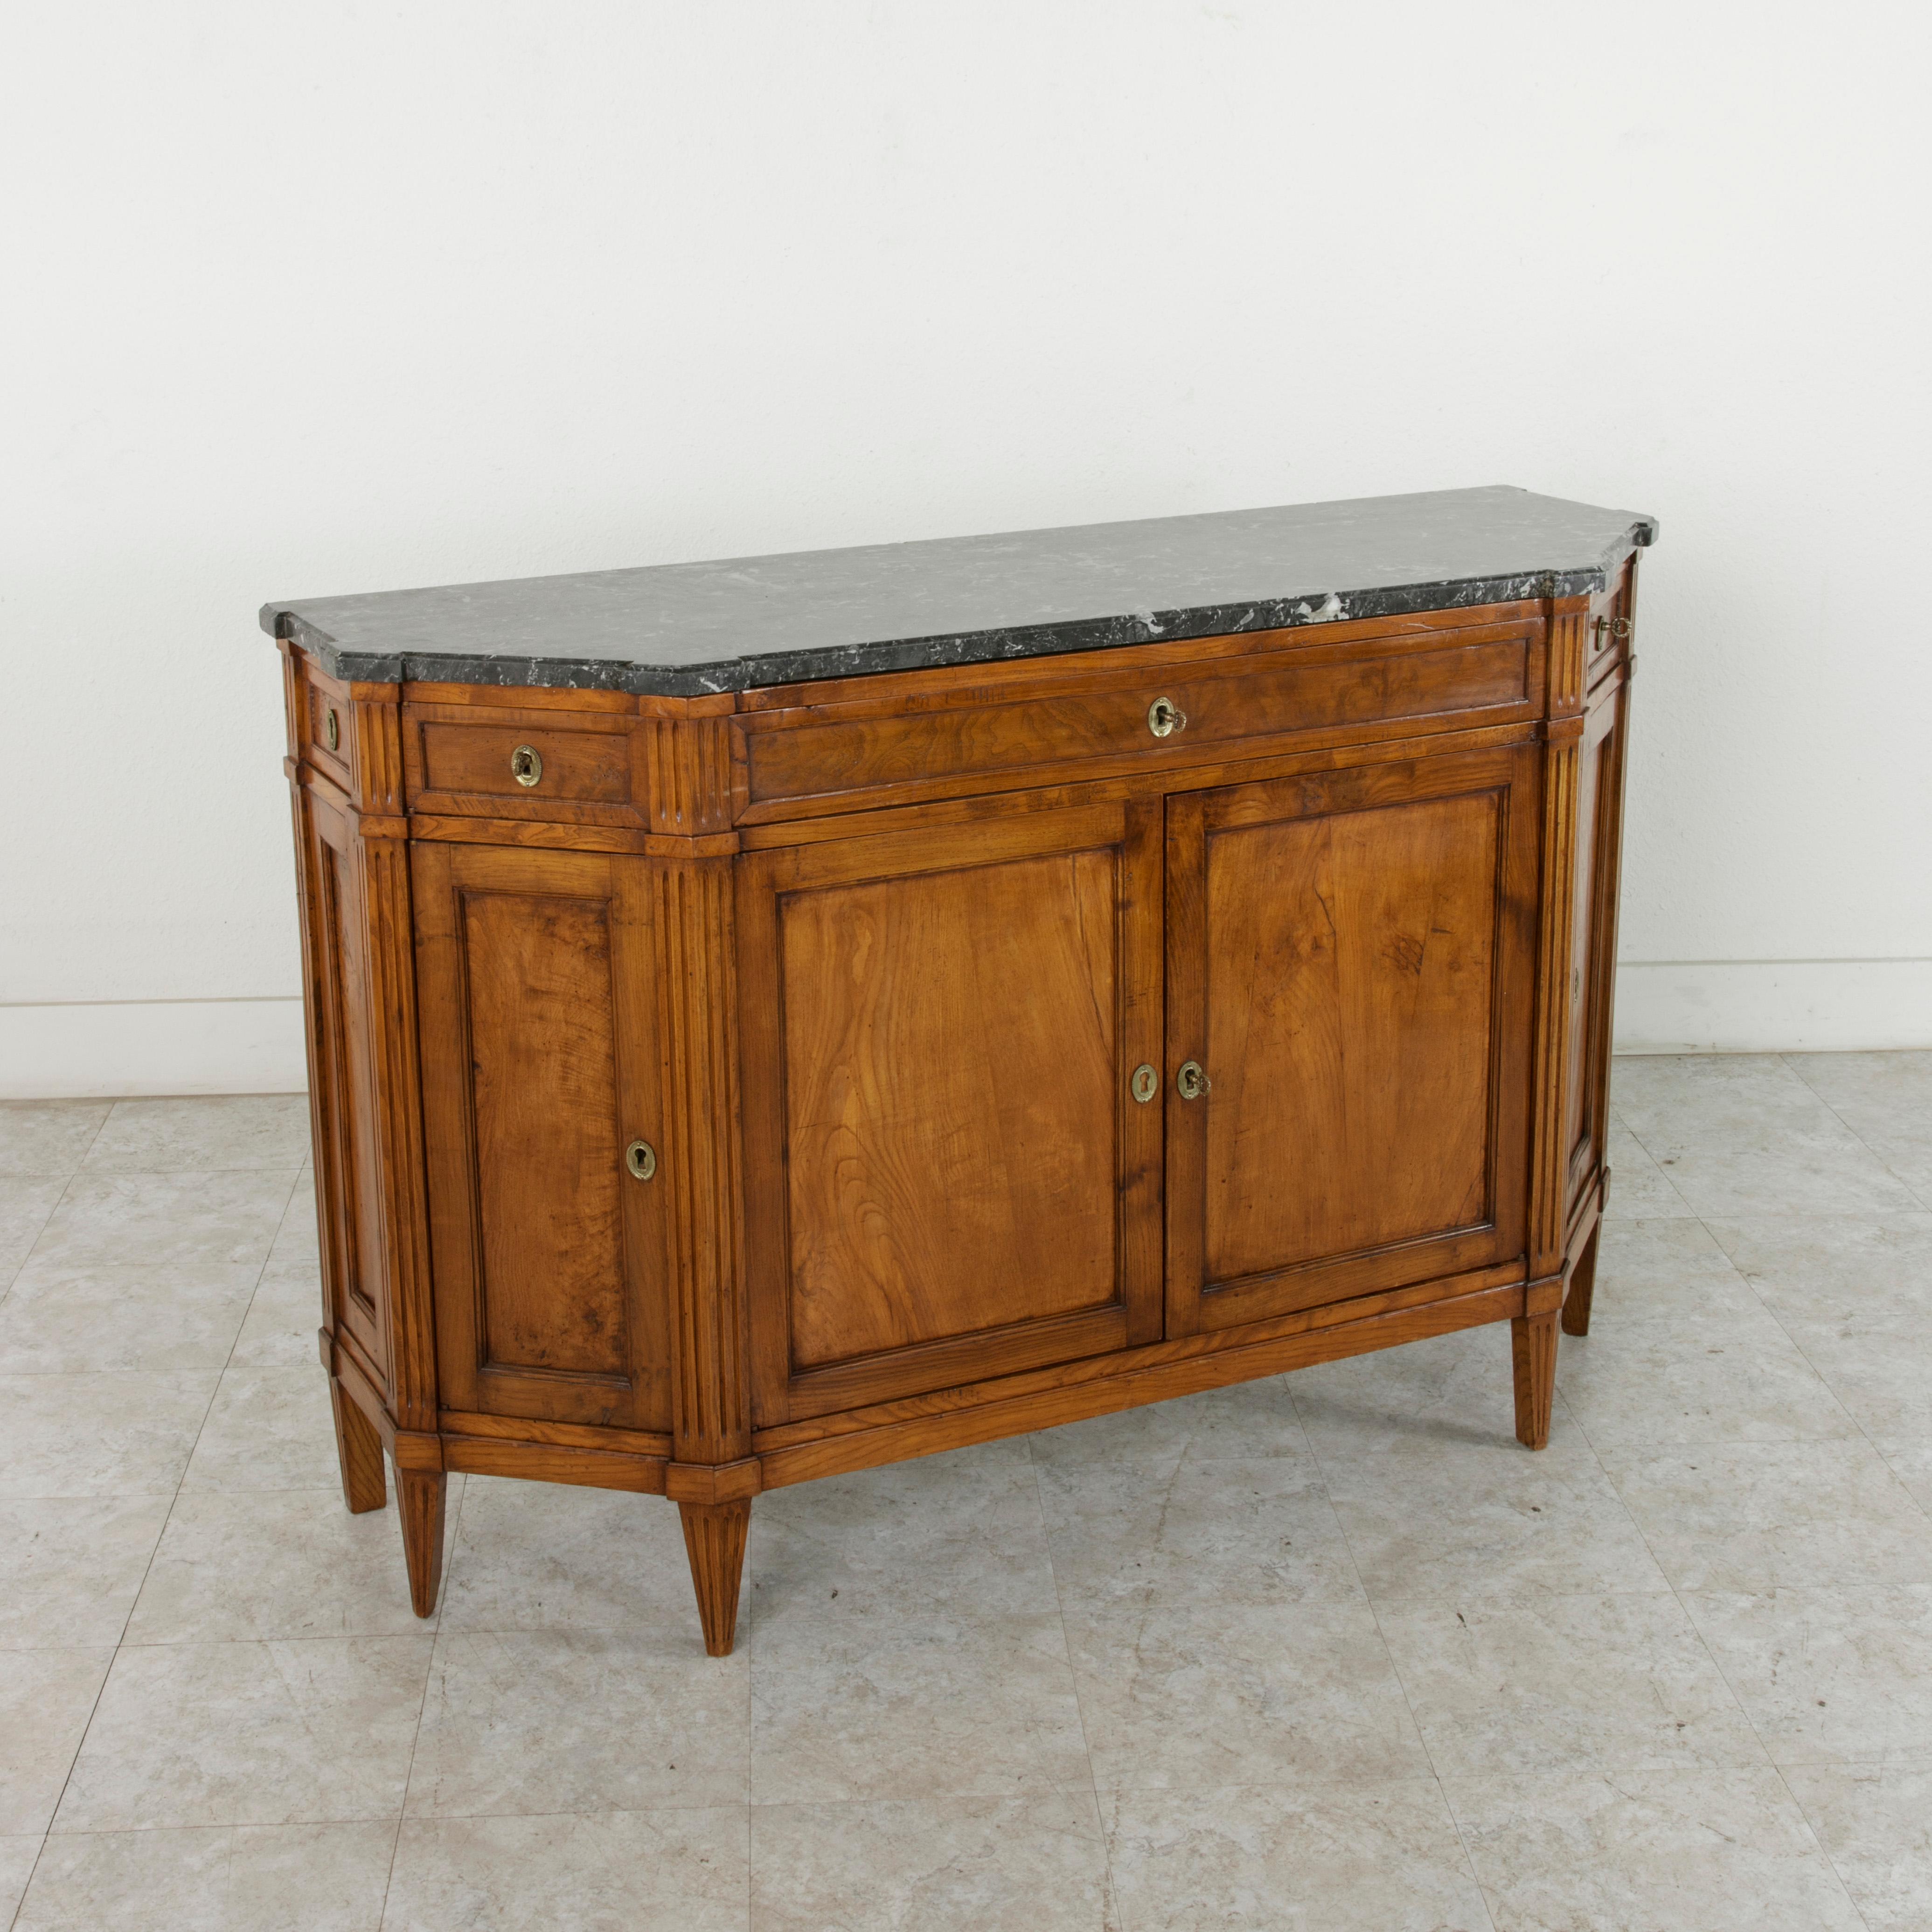 Found in Paris, France, this late 19th century Louis XVI style enfilade, sideboard, or buffet features a rare five-sided ashwood facade with a beveled Saint Anne marble top. The piece has Classic Louis XVI fluted corners and rests on tapered fluted